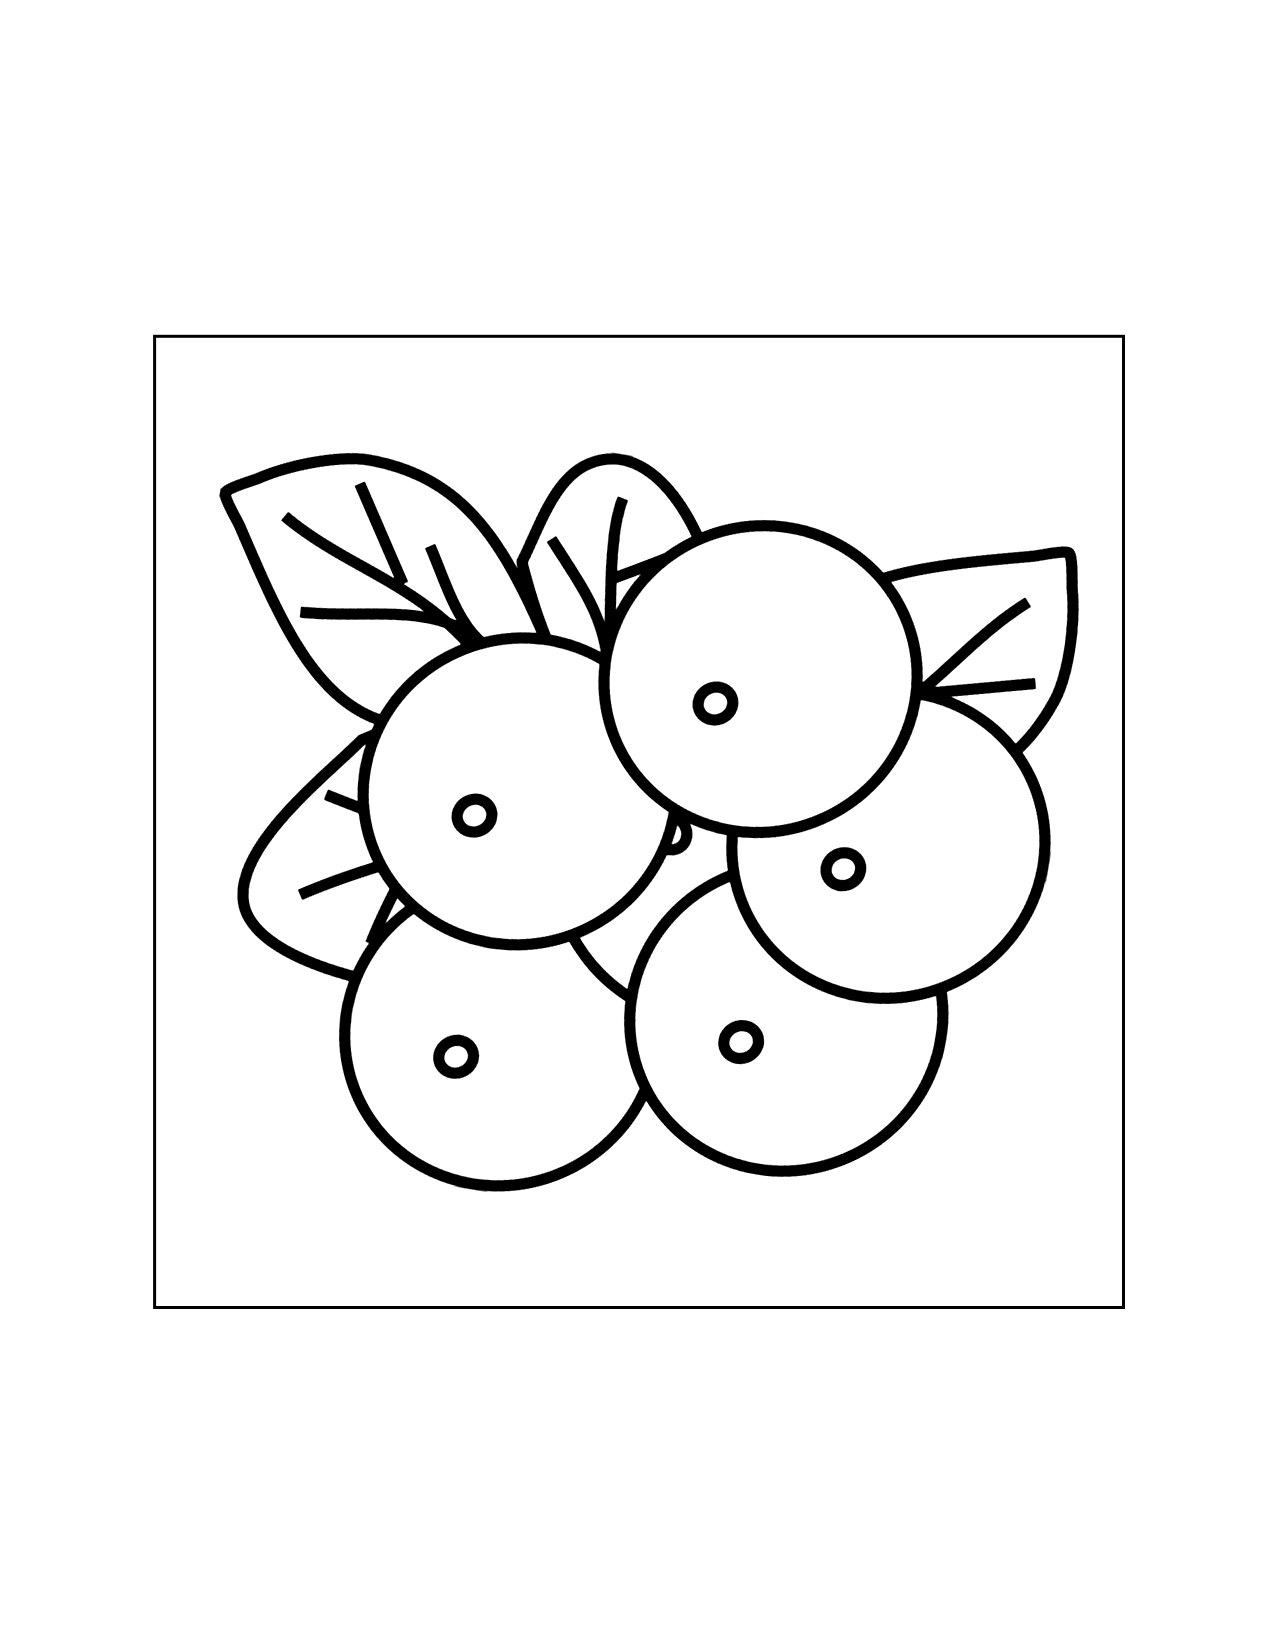 Easy Blueberry Coloring Page